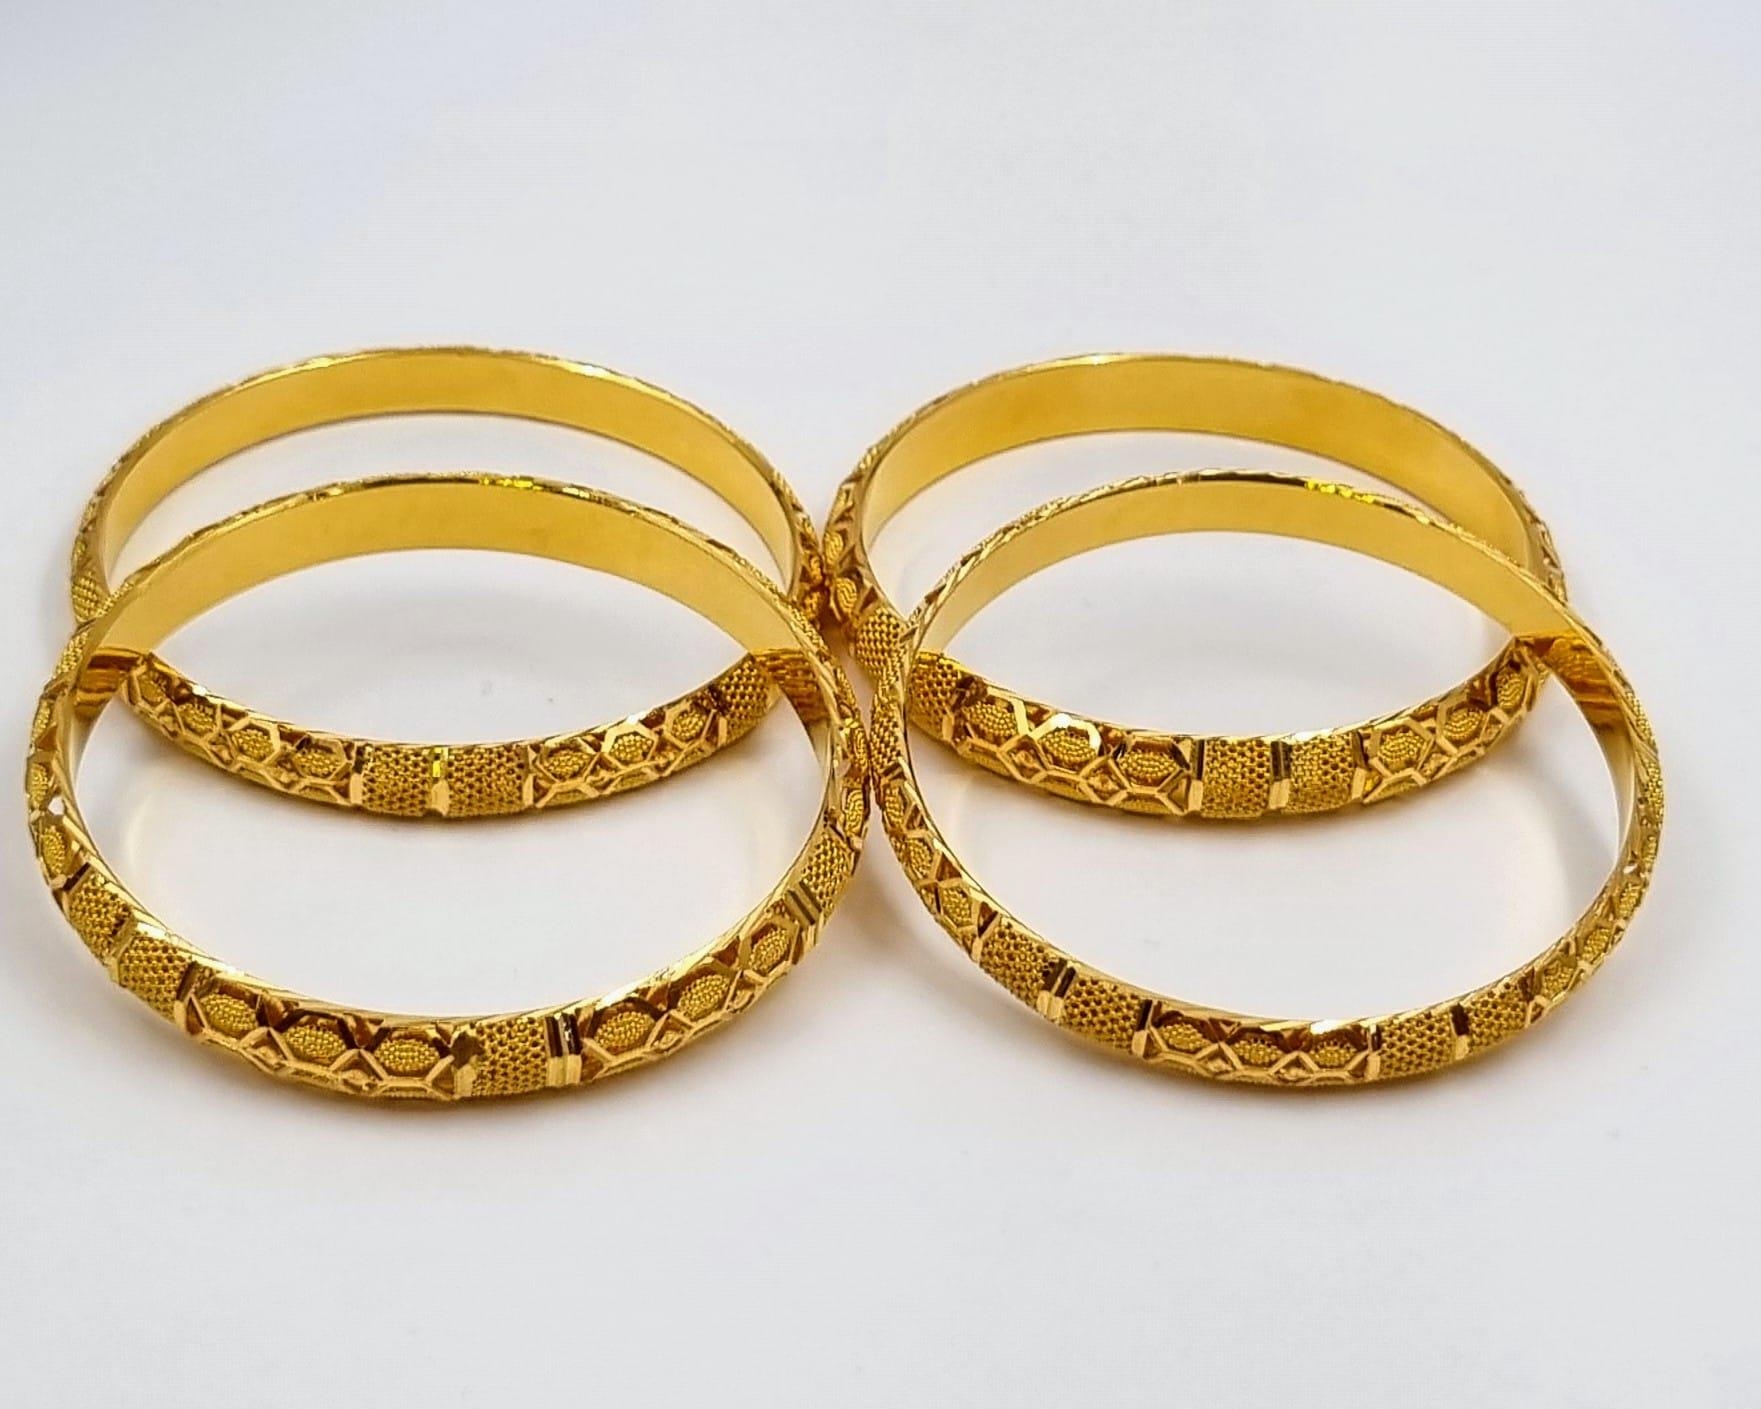 Four 22k Yellow Gold Asian Wedding Bangles. Geometric pierced decoration throughout. 6.5cm inner - Image 2 of 4